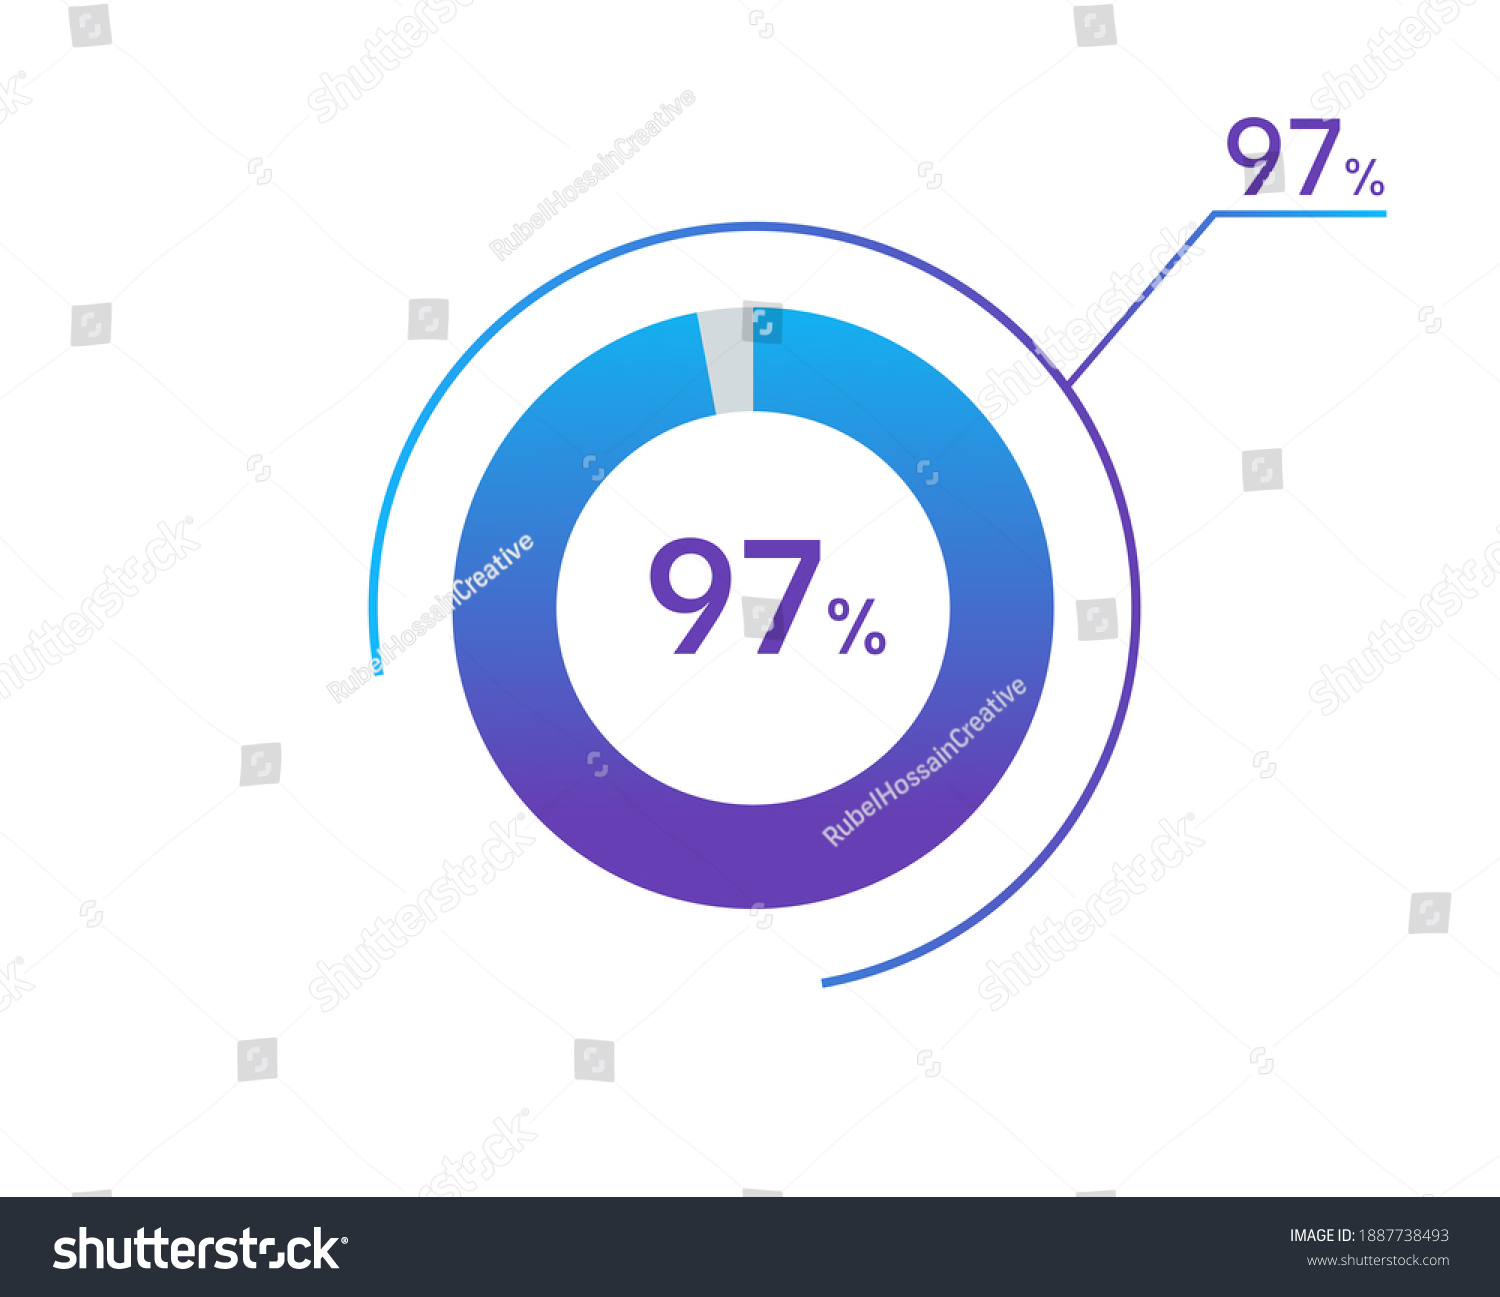 SVG of 97 percents pie chart infographic elements. 97% percentage infographic circle icons for download, illustration, business, web design svg